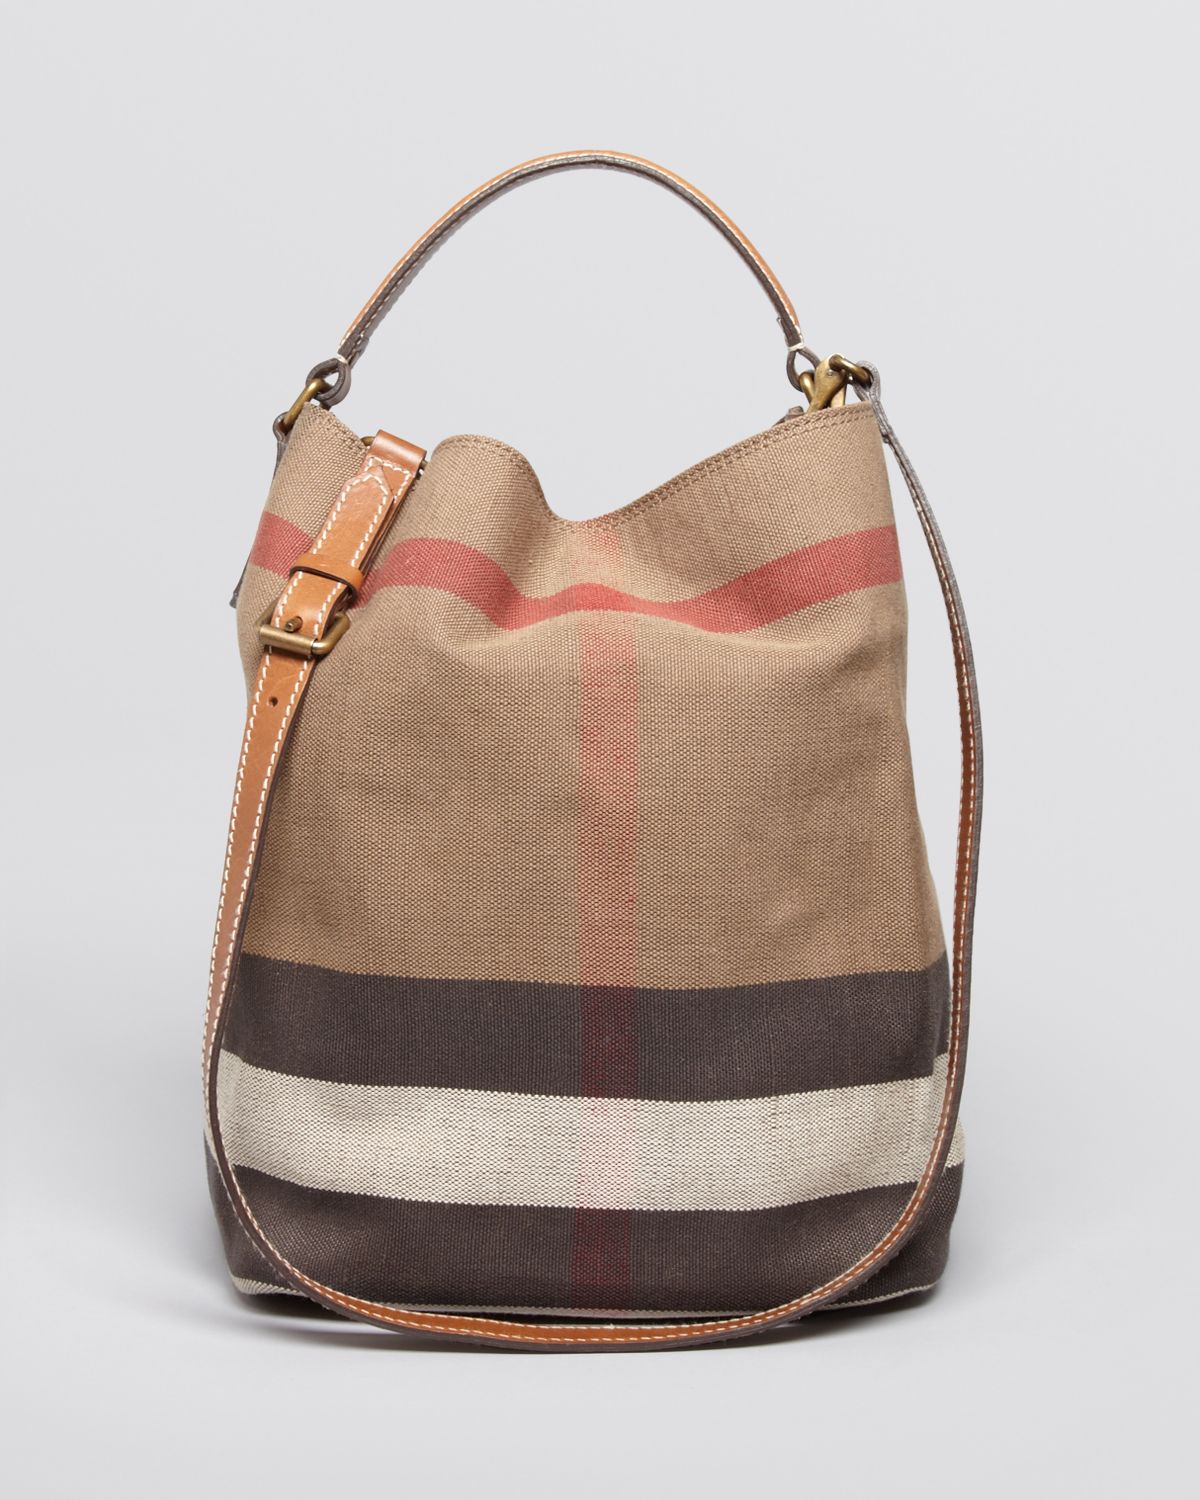 Lyst - Burberry Canvas Check Medium Ashby Hobo in Brown